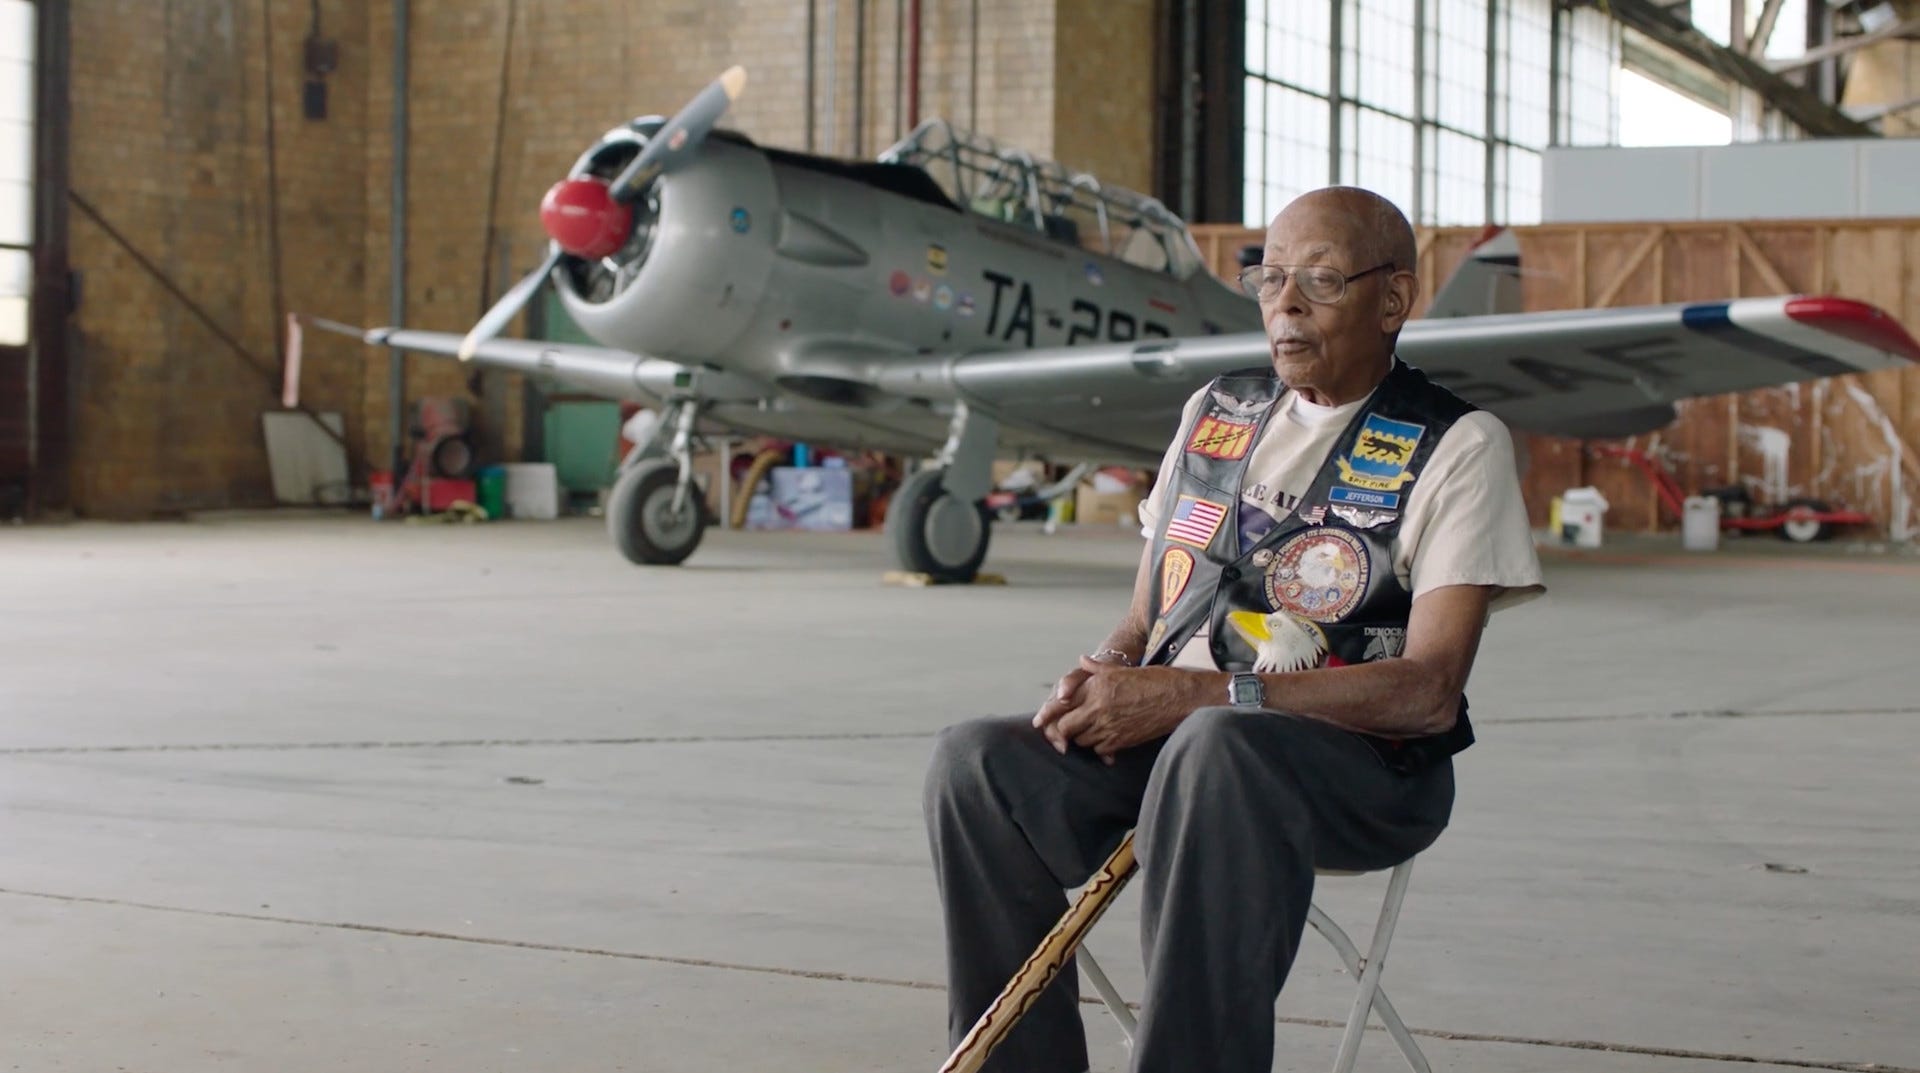 In "Through the Flak: War Stories of the Tuskegee Airmen," Detroiters Lt. Col. Alexander Jefferson and Lt. Col. Harry T. Stewart recount their experiences as part of the first group of African-American military pilots to fight in a World War.